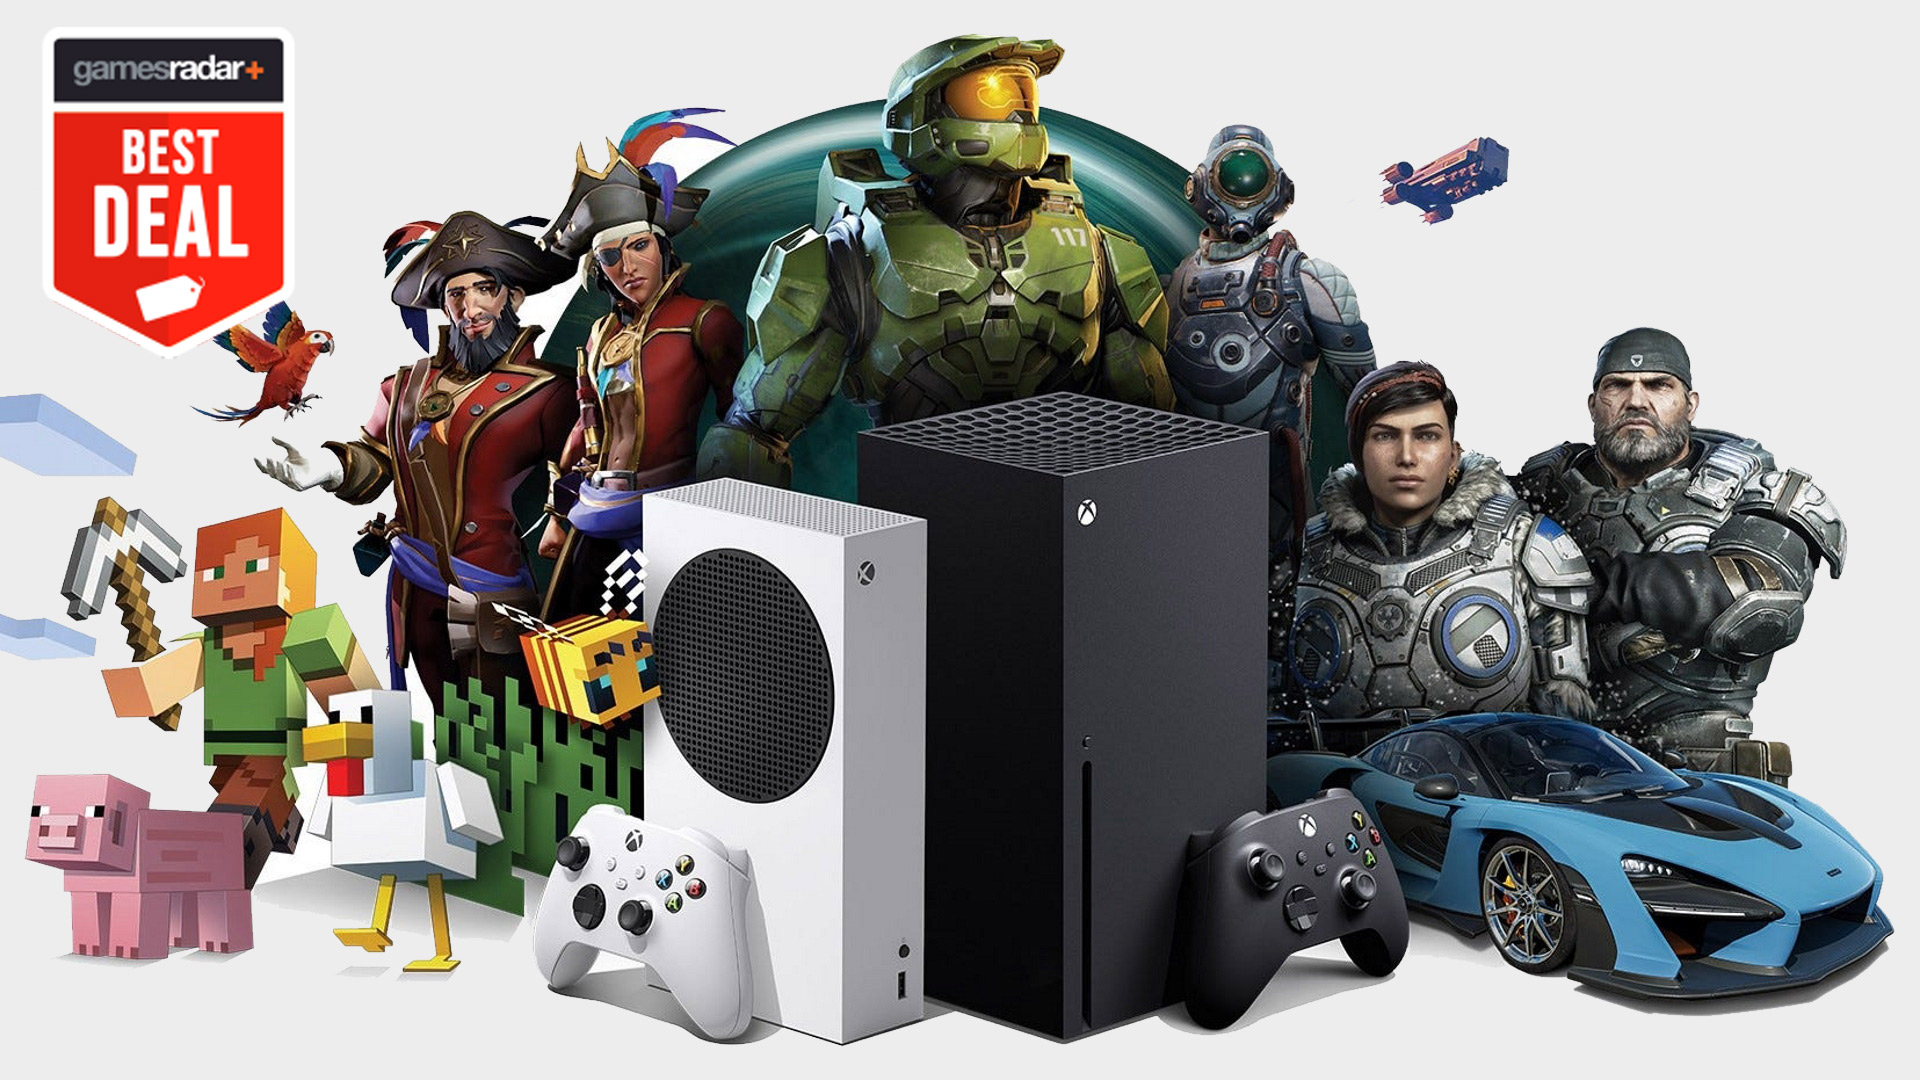 Xbox Series X price, bundles, and deals – how to save cash on your new setup